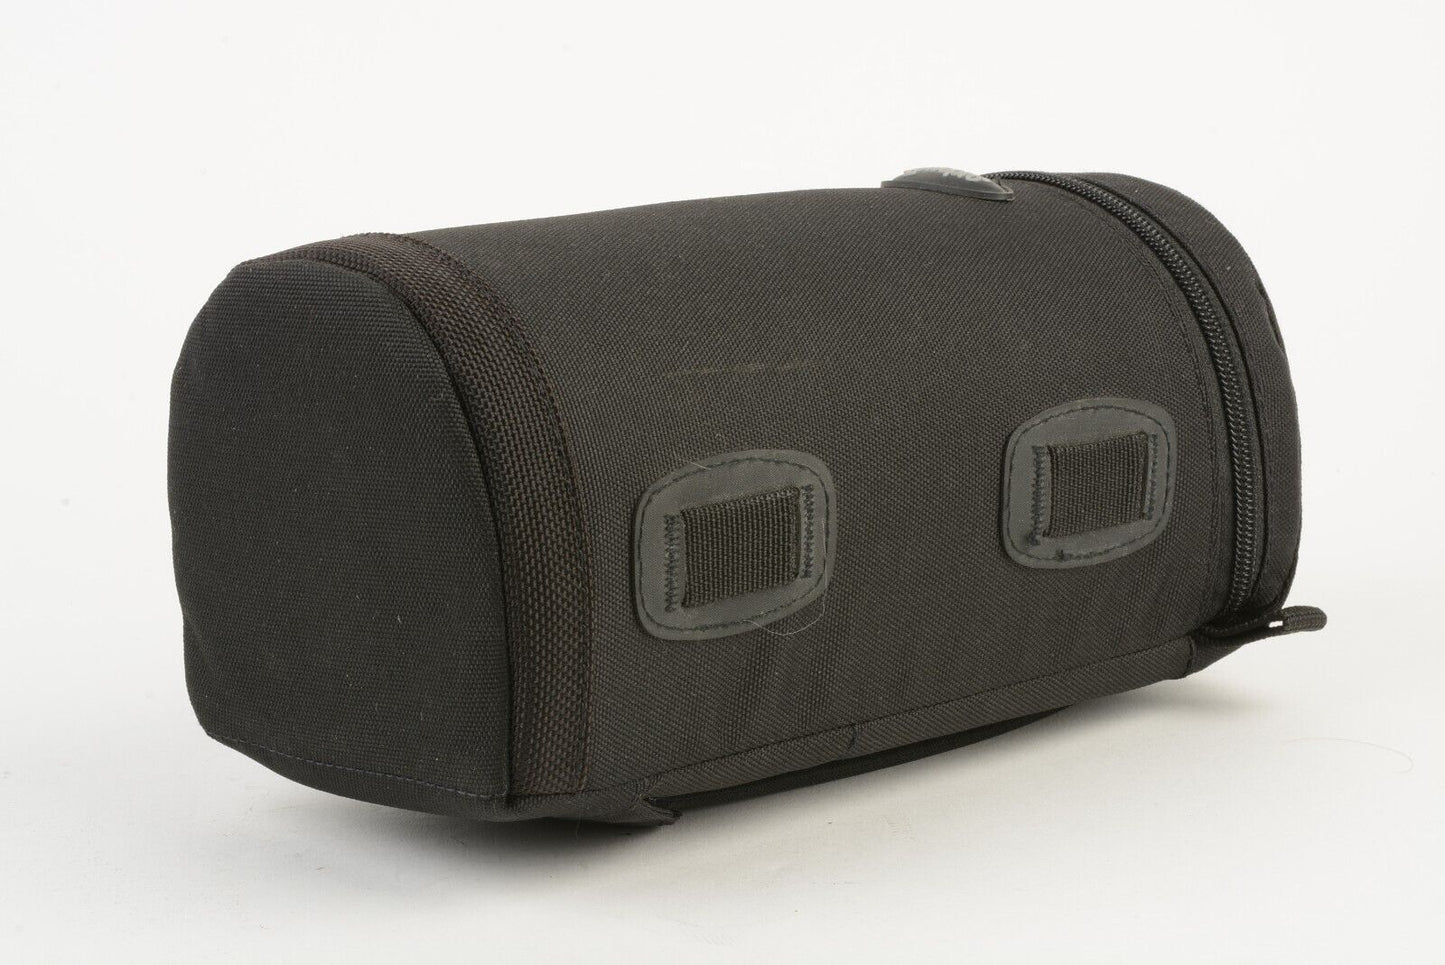 EXC++ LOWEPRO LENS CASE #2 BLACK PADDED LENS CASE 9" TALL x 3" WIDE